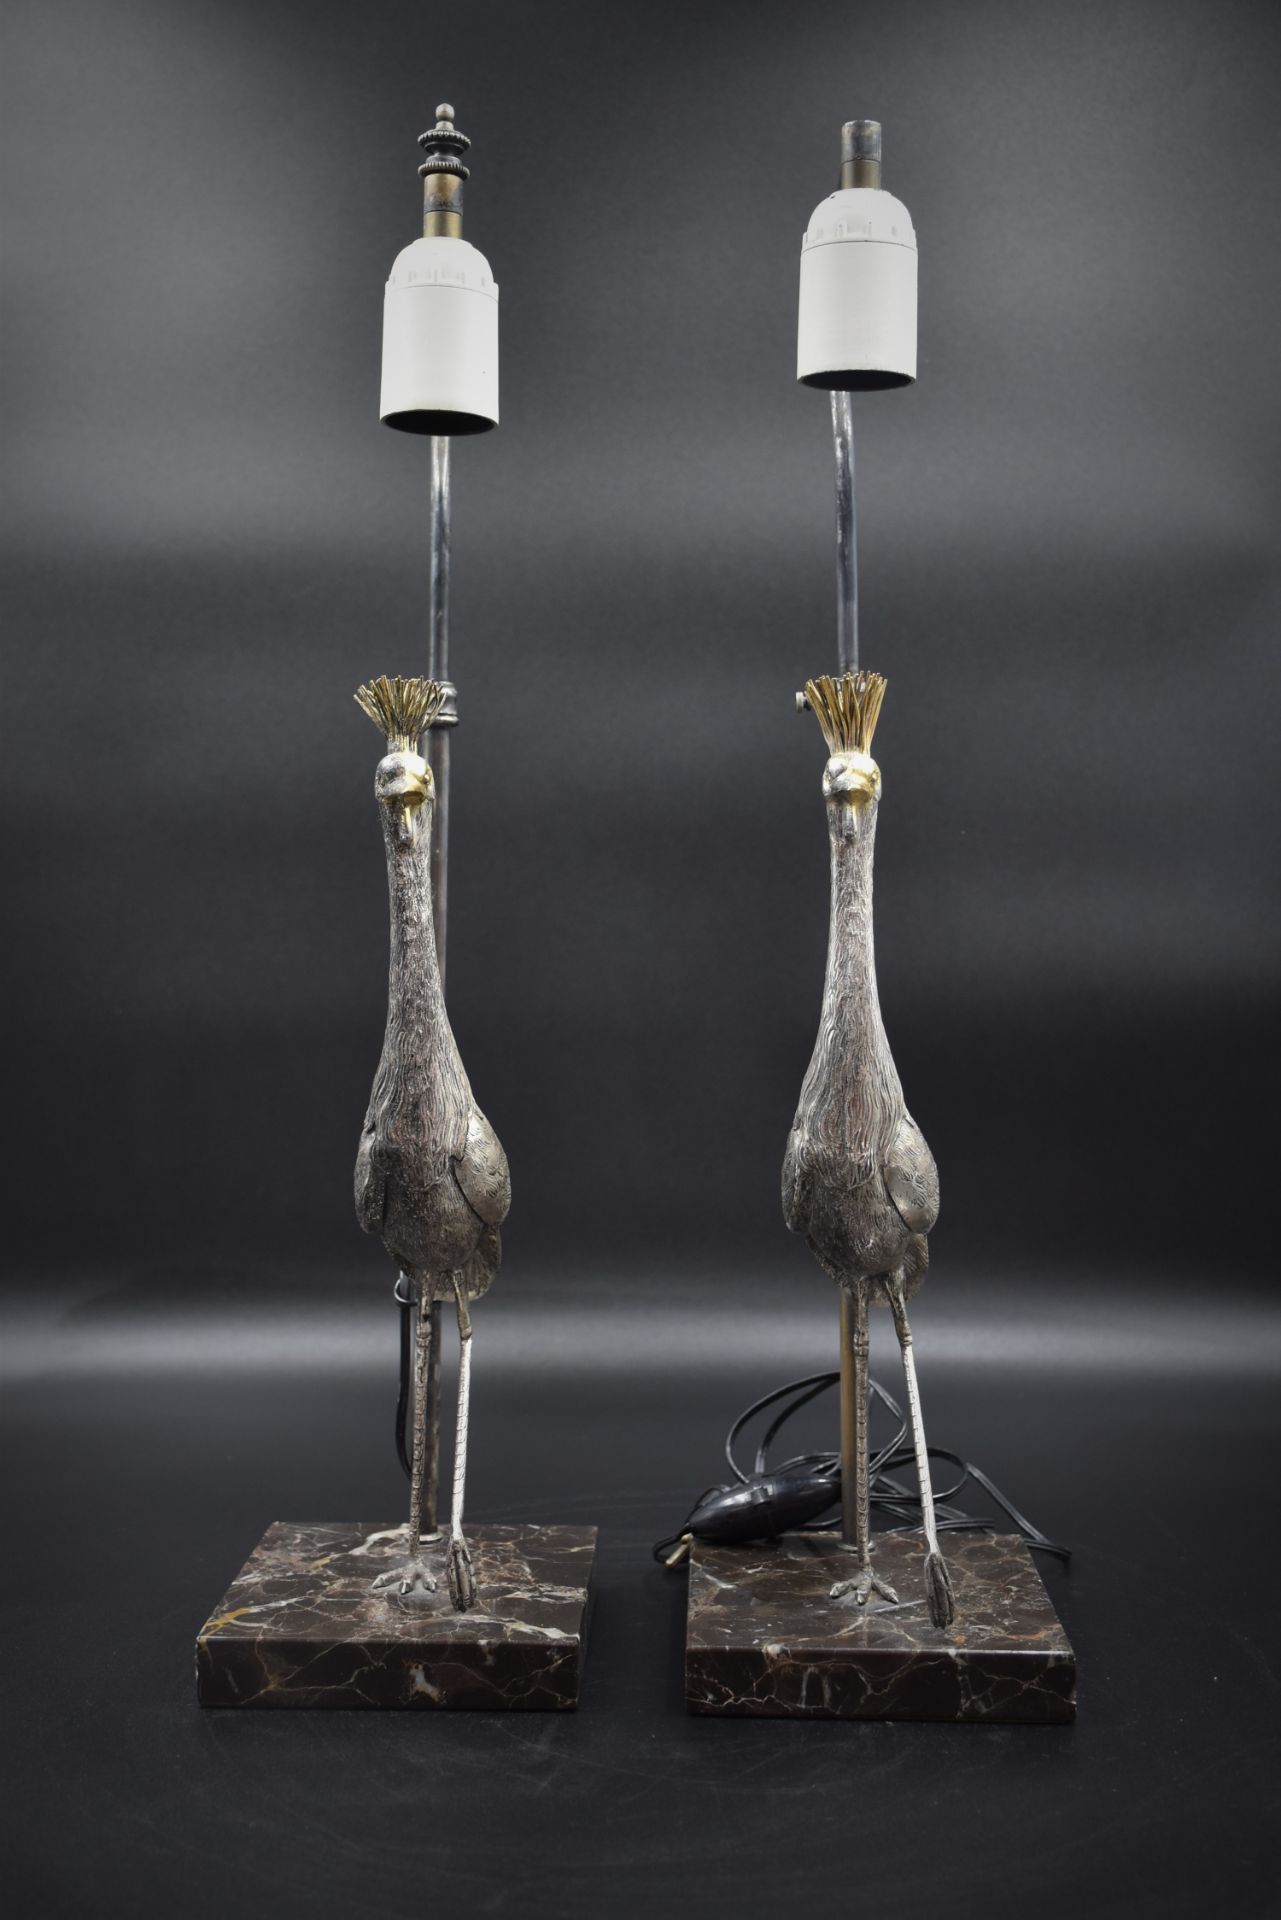 Pair of lamps about 1950 with decorations of stilt walkers out of silver plated metal. Height : 52 c - Image 2 of 4